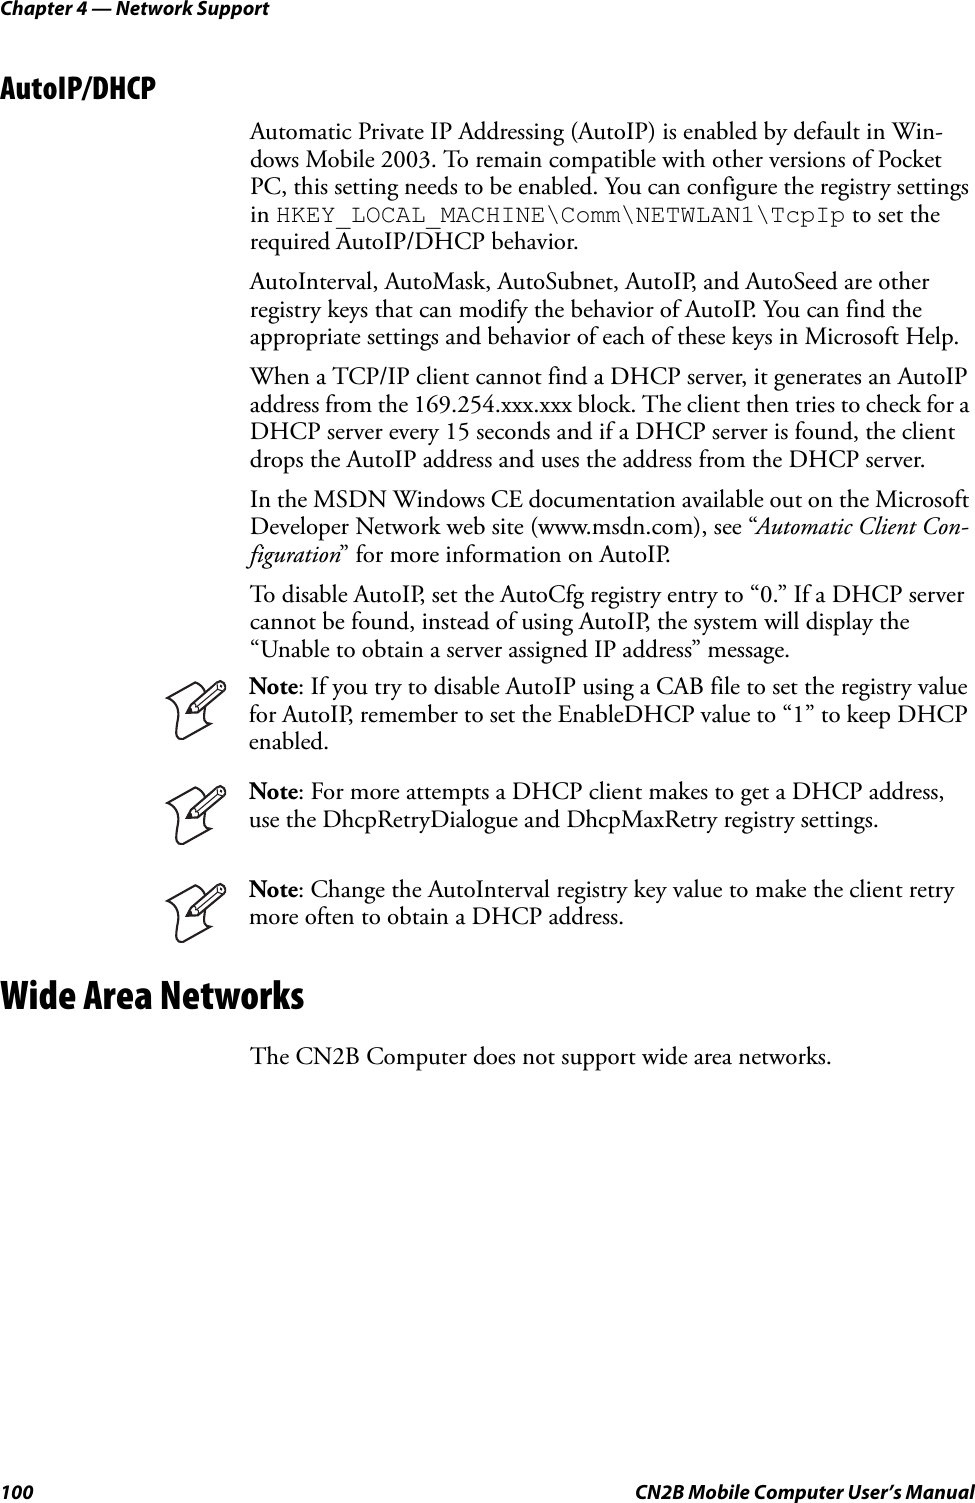 Chapter 4 — Network Support100 CN2B Mobile Computer User’s ManualAutoIP/DHCPAutomatic Private IP Addressing (AutoIP) is enabled by default in Win-dows Mobile 2003. To remain compatible with other versions of Pocket PC, this setting needs to be enabled. You can configure the registry settings in HKEY_LOCAL_MACHINE\Comm\NETWLAN1\TcpIp to set the required AutoIP/DHCP behavior.AutoInterval, AutoMask, AutoSubnet, AutoIP, and AutoSeed are other registry keys that can modify the behavior of AutoIP. You can find the appropriate settings and behavior of each of these keys in Microsoft Help.When a TCP/IP client cannot find a DHCP server, it generates an AutoIP address from the 169.254.xxx.xxx block. The client then tries to check for a DHCP server every 15 seconds and if a DHCP server is found, the client drops the AutoIP address and uses the address from the DHCP server.In the MSDN Windows CE documentation available out on the Microsoft Developer Network web site (www.msdn.com), see “Automatic Client Con-figuration” for more information on AutoIP.To disable AutoIP, set the AutoCfg registry entry to “0.” If a DHCP server cannot be found, instead of using AutoIP, the system will display the “Unable to obtain a server assigned IP address” message.Wide Area NetworksThe CN2B Computer does not support wide area networks.Note: If you try to disable AutoIP using a CAB file to set the registry value for AutoIP, remember to set the EnableDHCP value to “1” to keep DHCP enabled.Note: For more attempts a DHCP client makes to get a DHCP address, use the DhcpRetryDialogue and DhcpMaxRetry registry settings.Note: Change the AutoInterval registry key value to make the client retry more often to obtain a DHCP address.